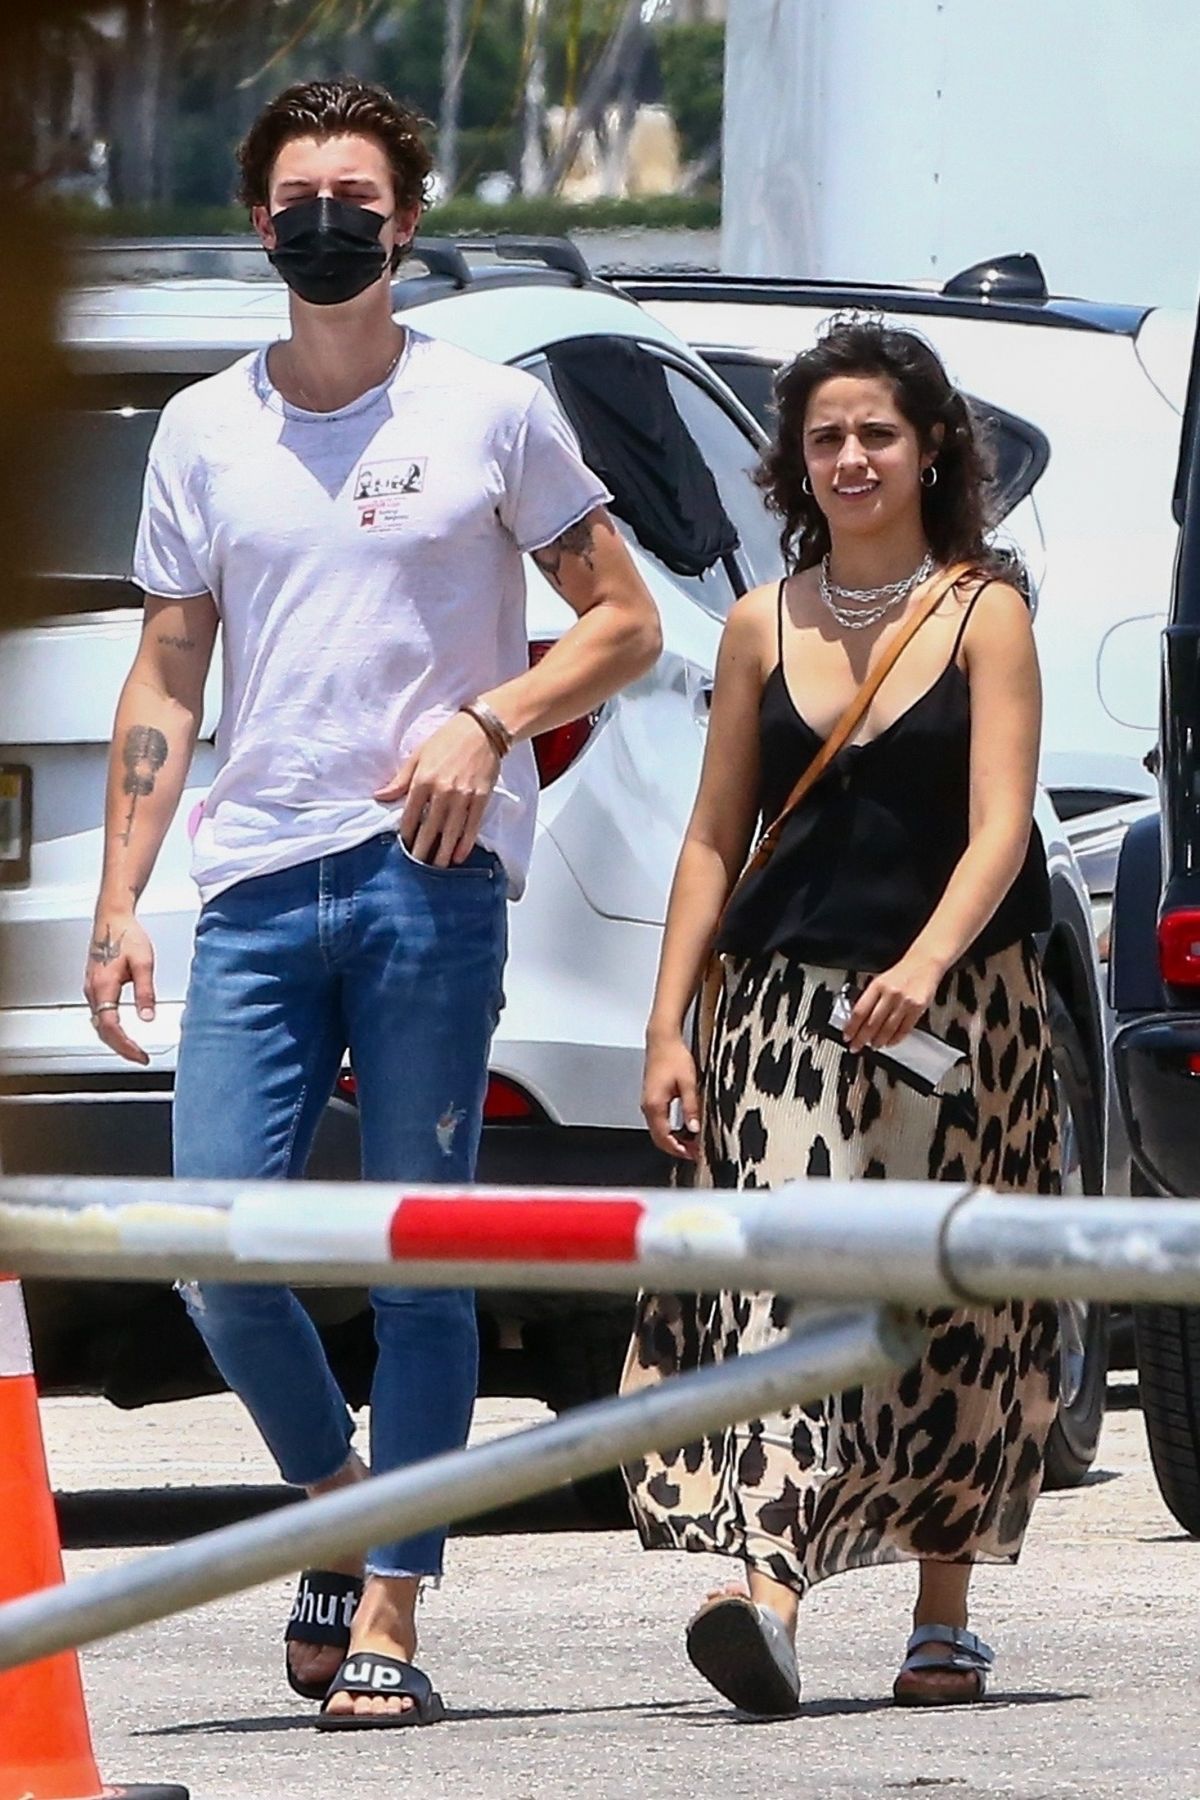 camila-cabello-and-shawn-mendes-out-in-miami-04-29-2021-6.jpg